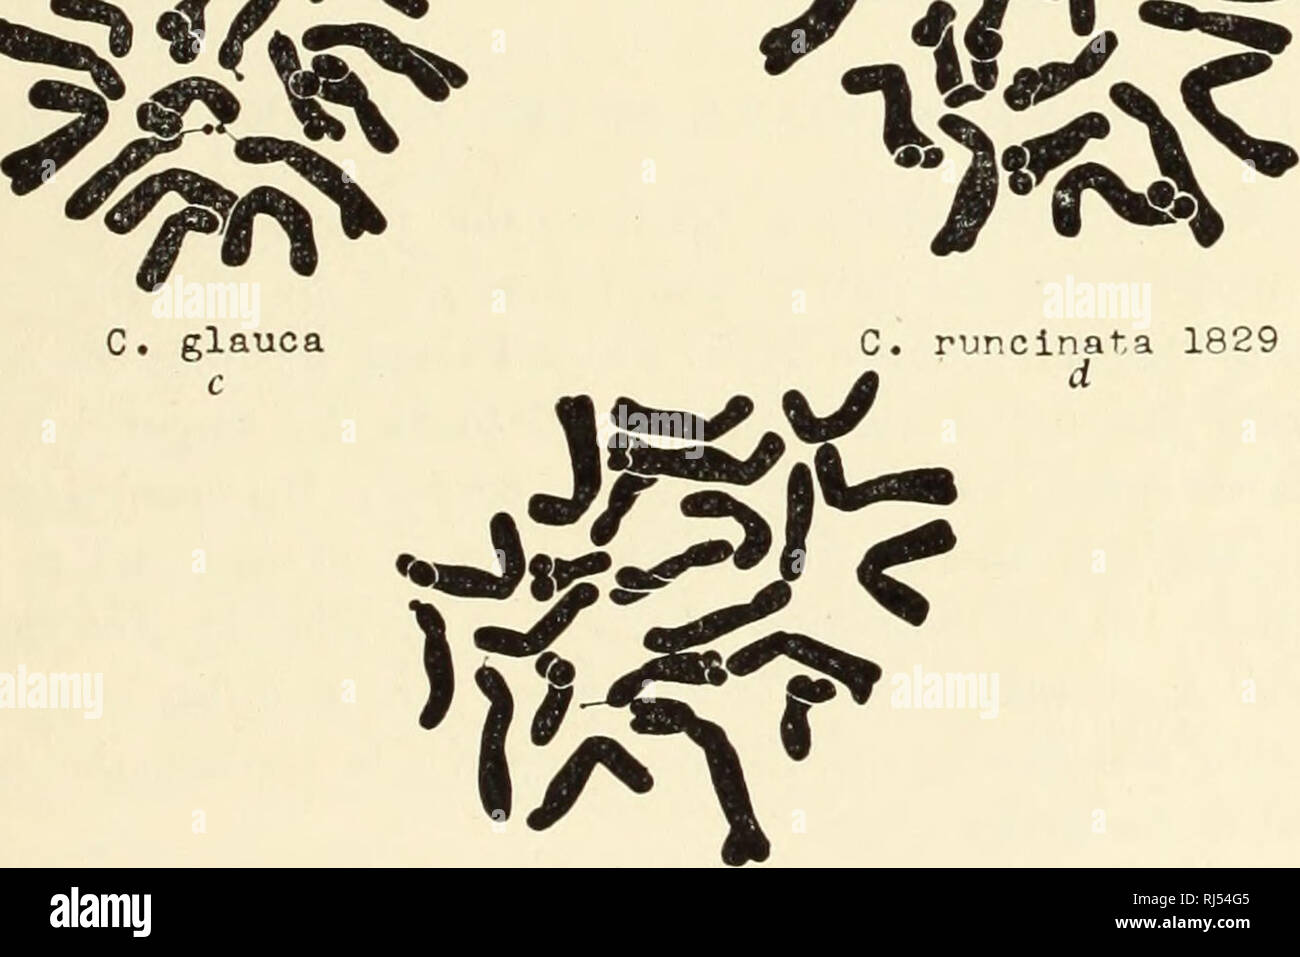 . Chromosomes and phylogeny in Crepis. Crepis; Plants; Chromosomes. 1930] Hollingshead-Babcock: Chromosomes and Phytogeny in Crepi.s 27 the possibility that the somatic number 22 exists in this species, too, as it does in occidentalis and gracilis. The C. andersoni, glauca, runcinata group (fig. 22) of which several plants representing different accessions (table 1) have been C. andersoni 2086 C. andersoni 2136 m. C. runcinata 2065 e Figure 22. examined, has given uniformly complexes of 22 chromosomes contain- ing similar types. Whether it would be possible by a prolonged study to reveal diffe Stock Photo